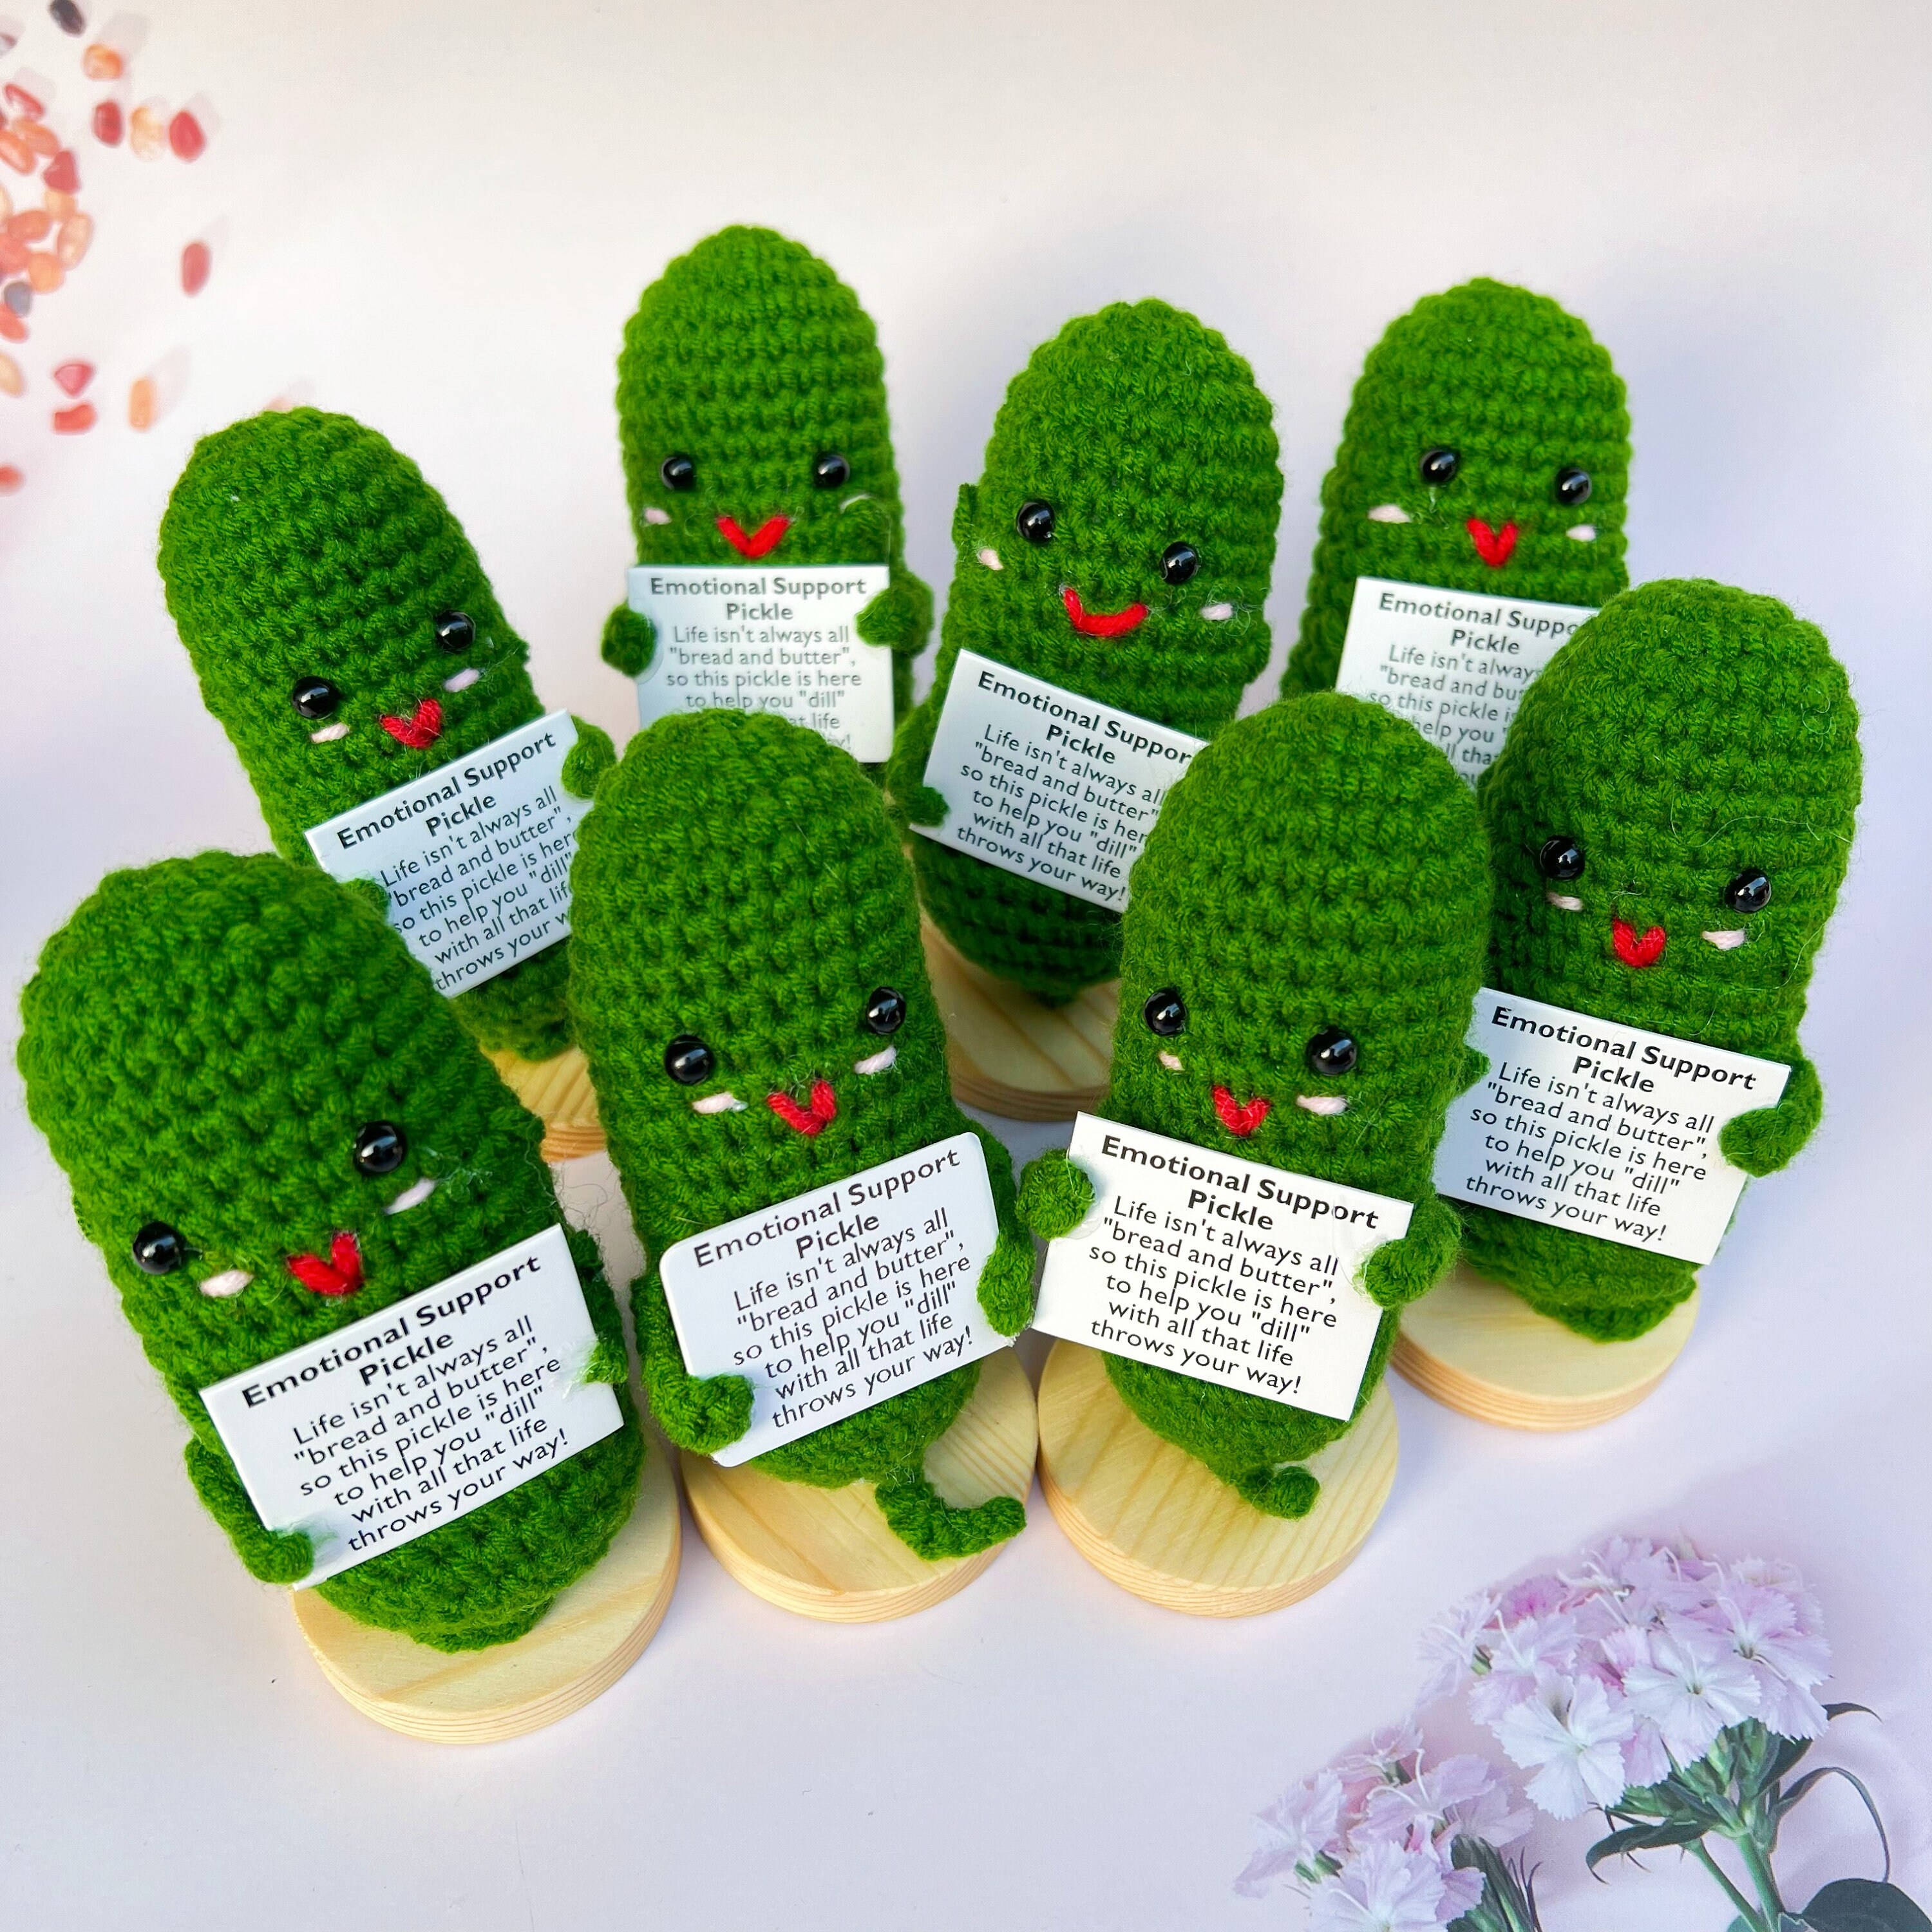 Custom Text Available) Crochet Emotional Support Plushies - Emotional  Support Pickles, Positive Potato Over the Hill Stress Relief Dill with  Challenges Encouraging Gift – The Bloom Crafter, Emotional Support Pickle 